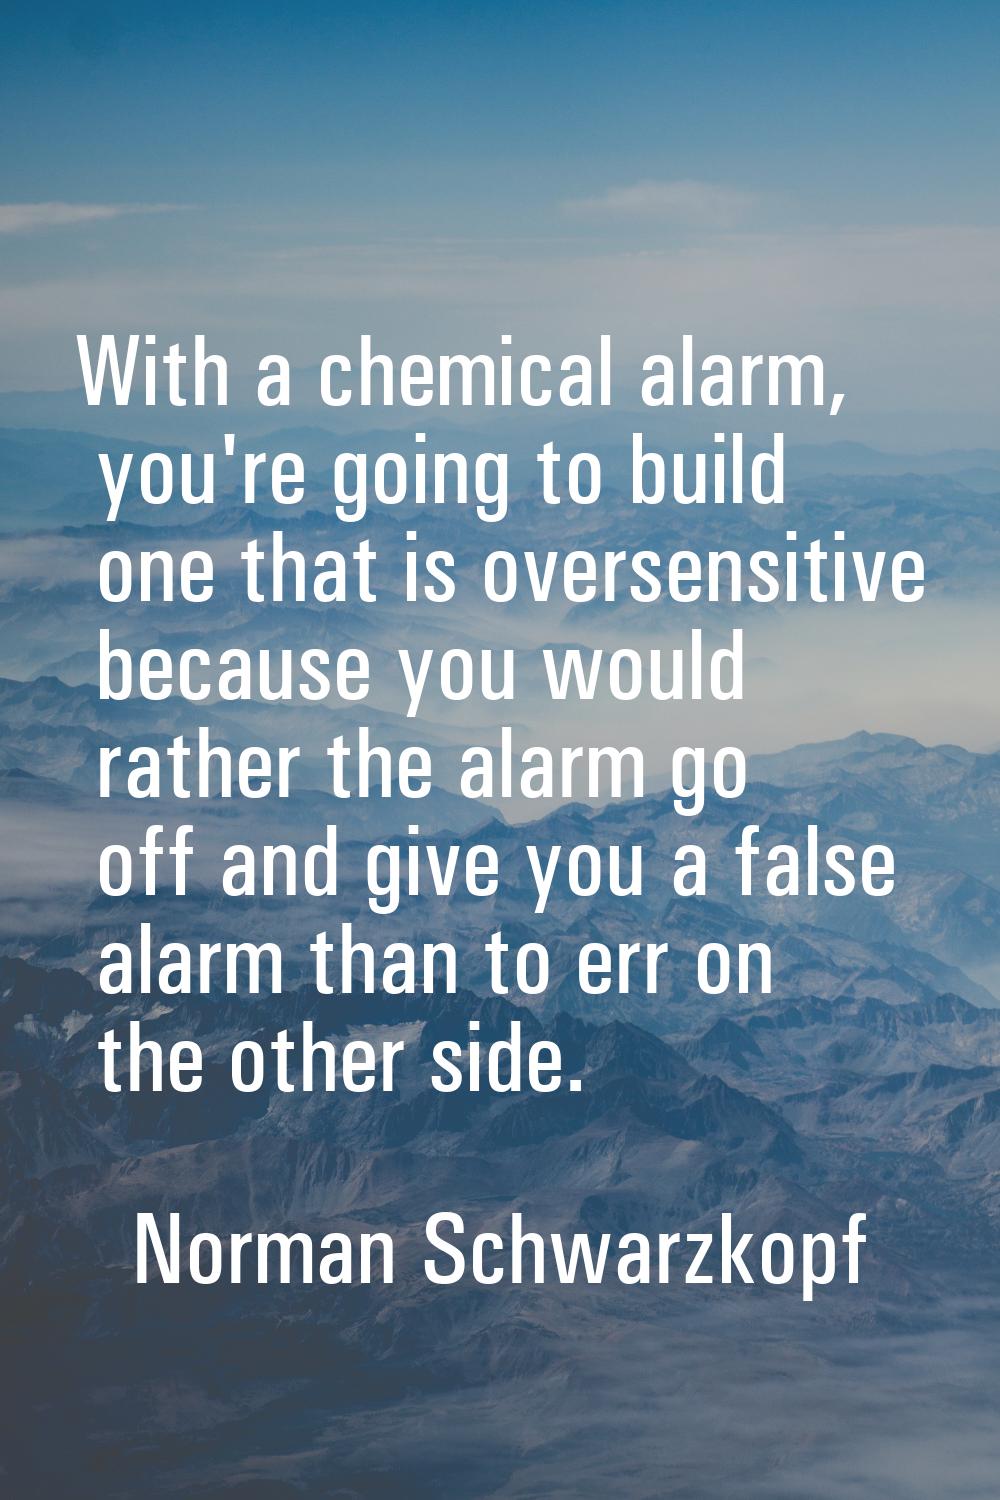 With a chemical alarm, you're going to build one that is oversensitive because you would rather the